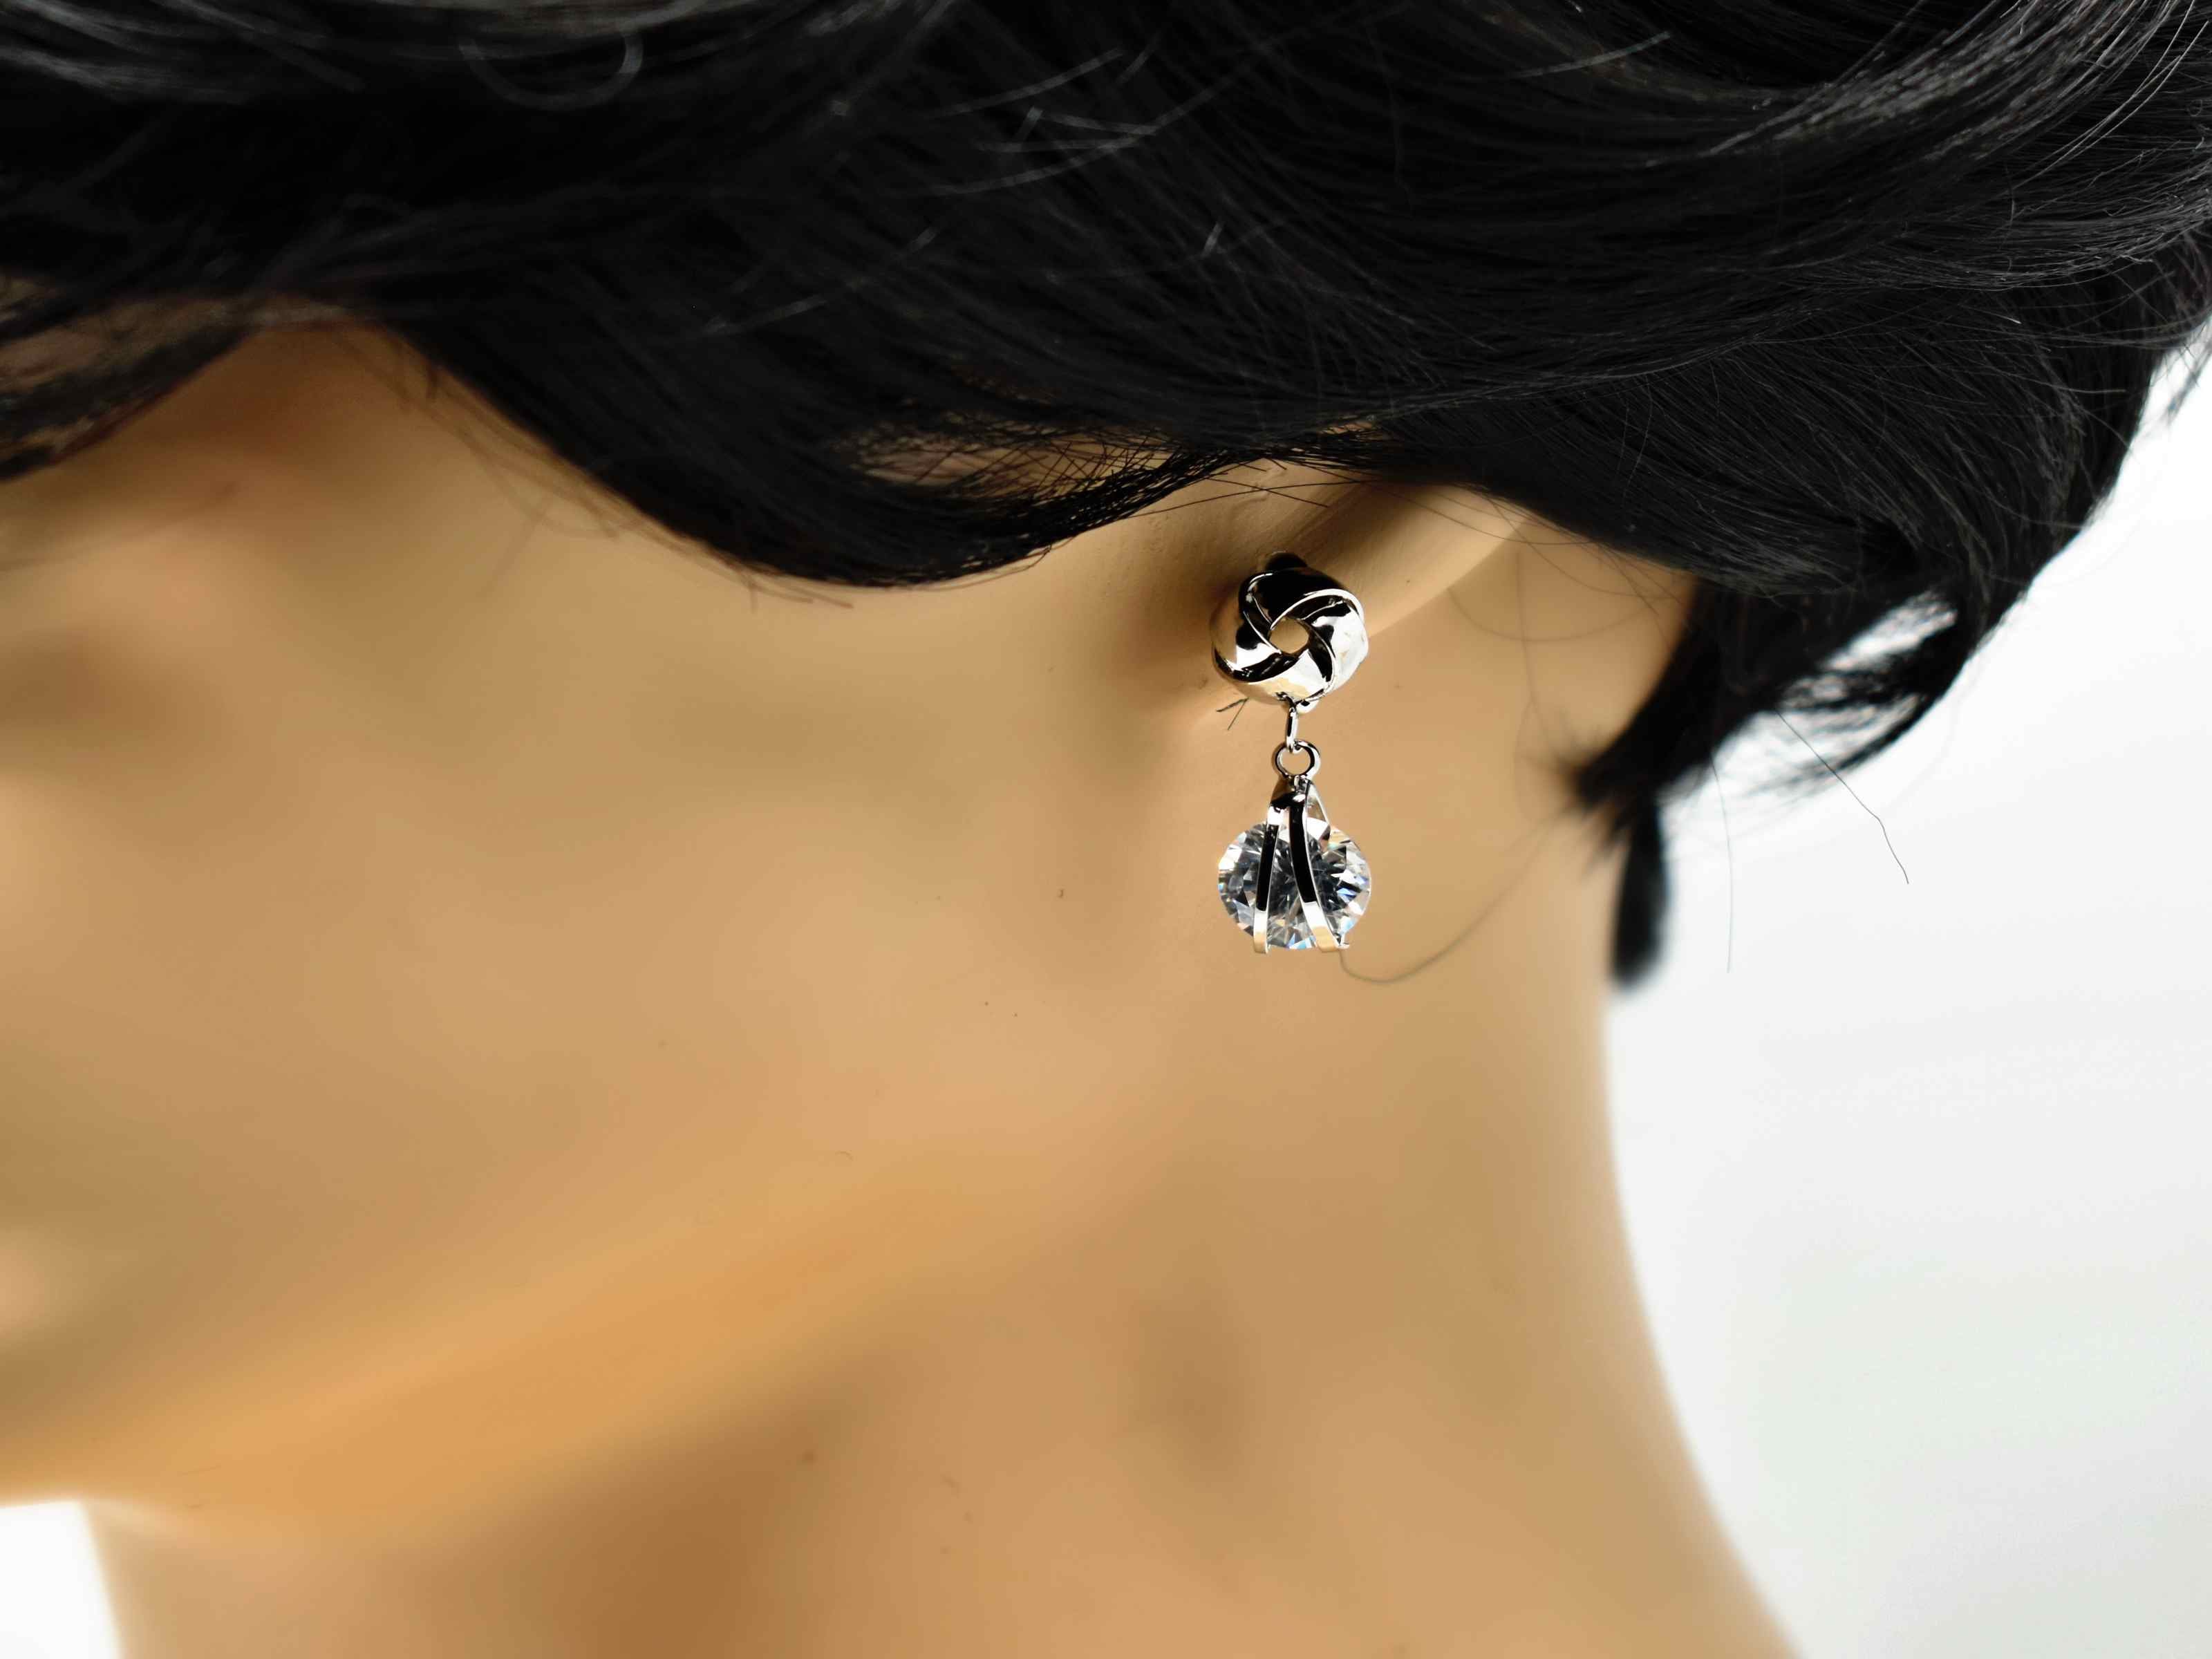 Our Erica earrings are so delicate and chic! These little silver beauties are the perfect knob chandelier earrings with a knot design and a drop dangle stone. It has a push back clasp and is 1 inch in length.